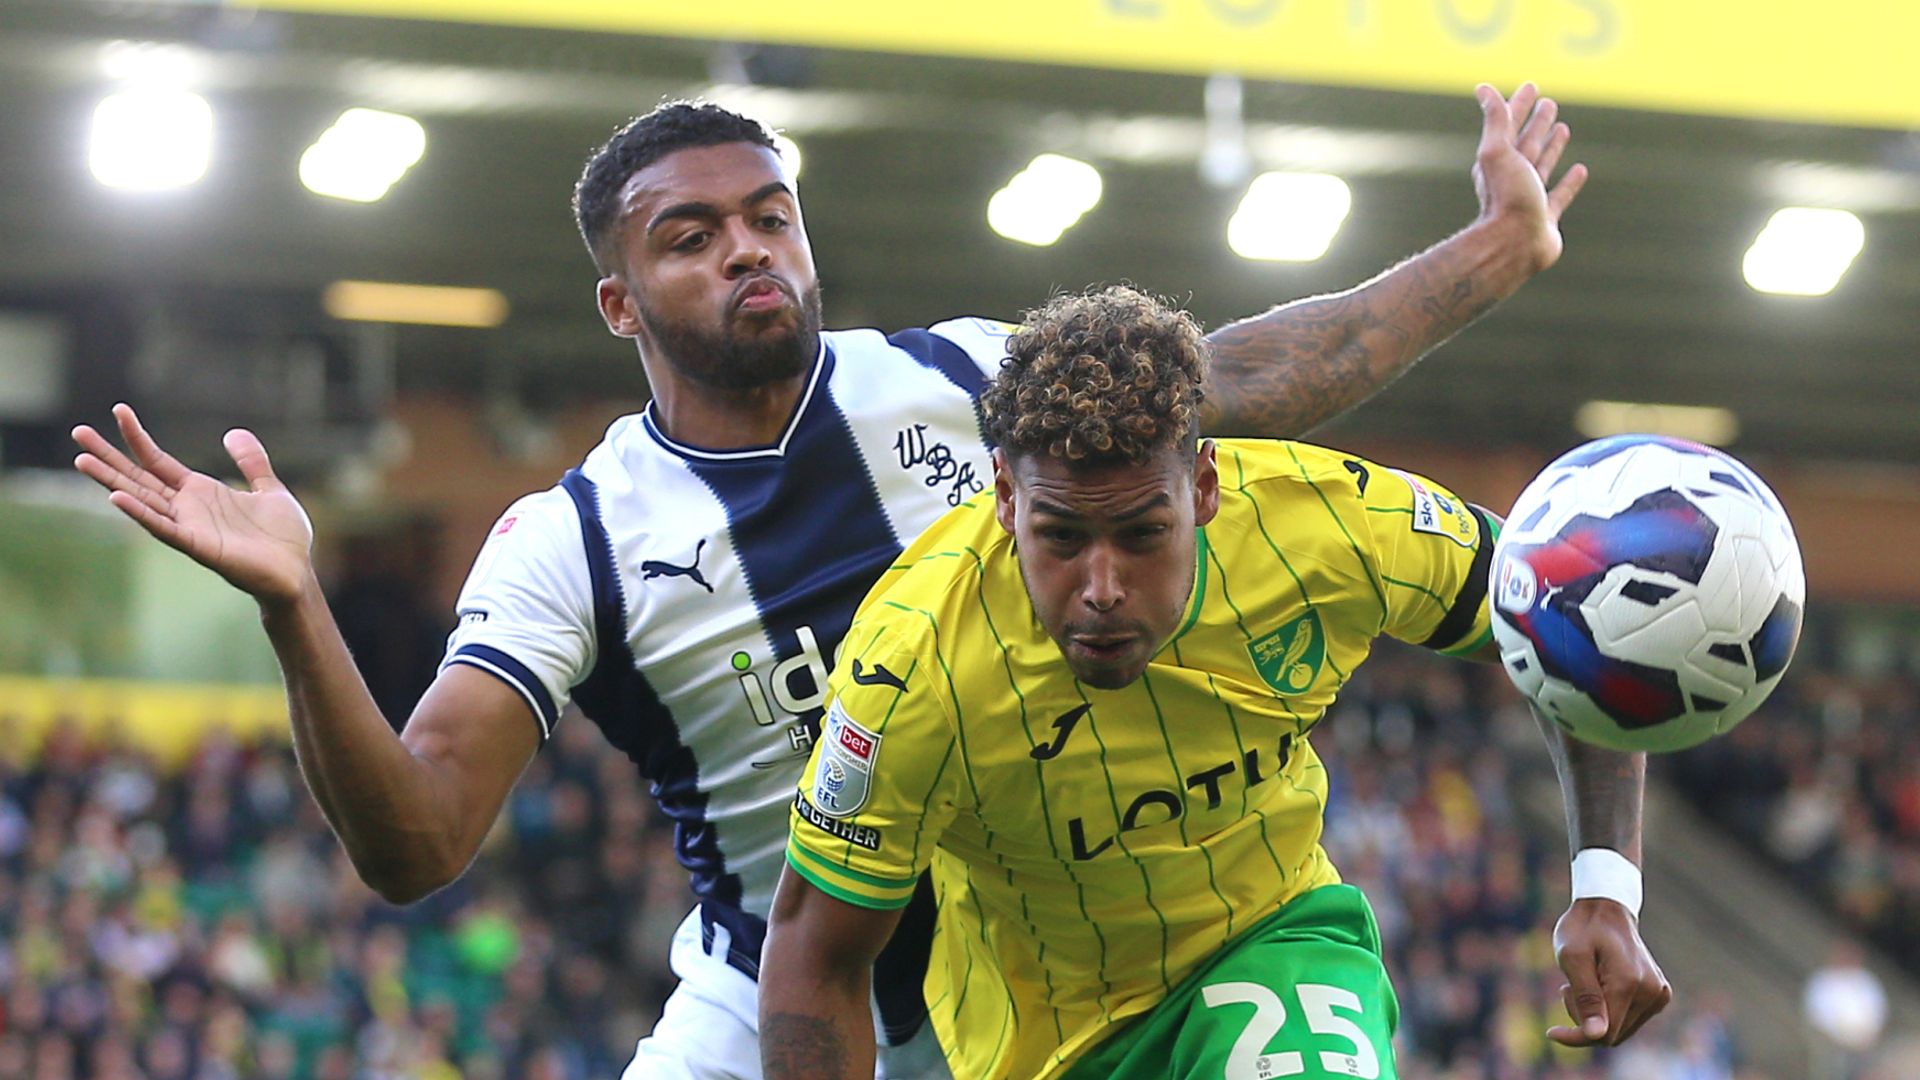 Norwich hit back to hold West Brom